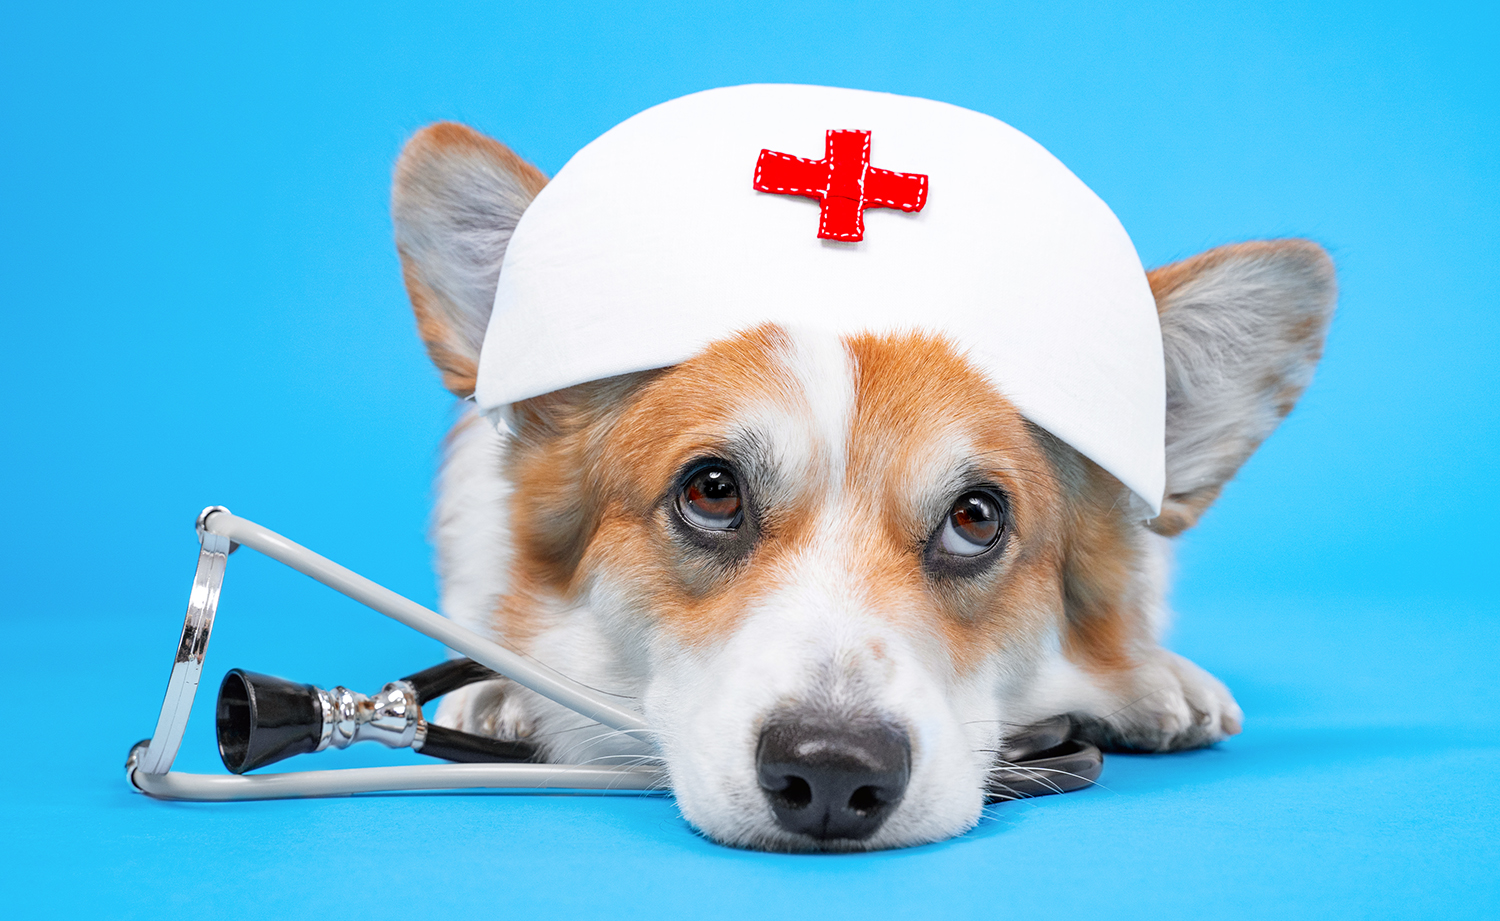 A dog lying down and wearing a stethoscope and a nurse’s hat with a red cross on it.